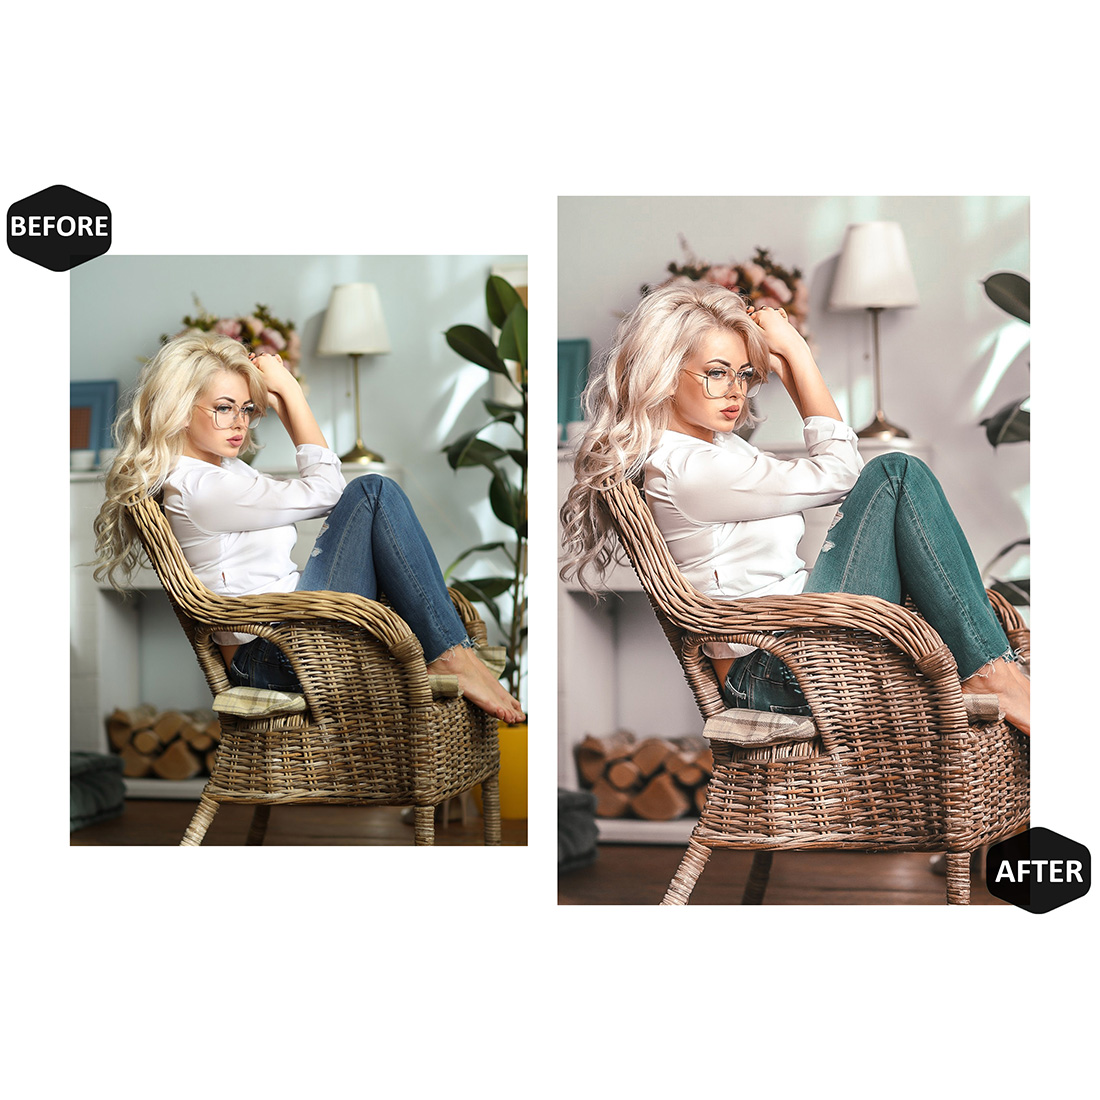 12 Photoshop Actions, Pastel Home Ps Action, Soft Skin ACR Preset, Bright Summer Ps Filter, Atn Portrait And Lifestyle Theme For Instagram, Blogger preview image.